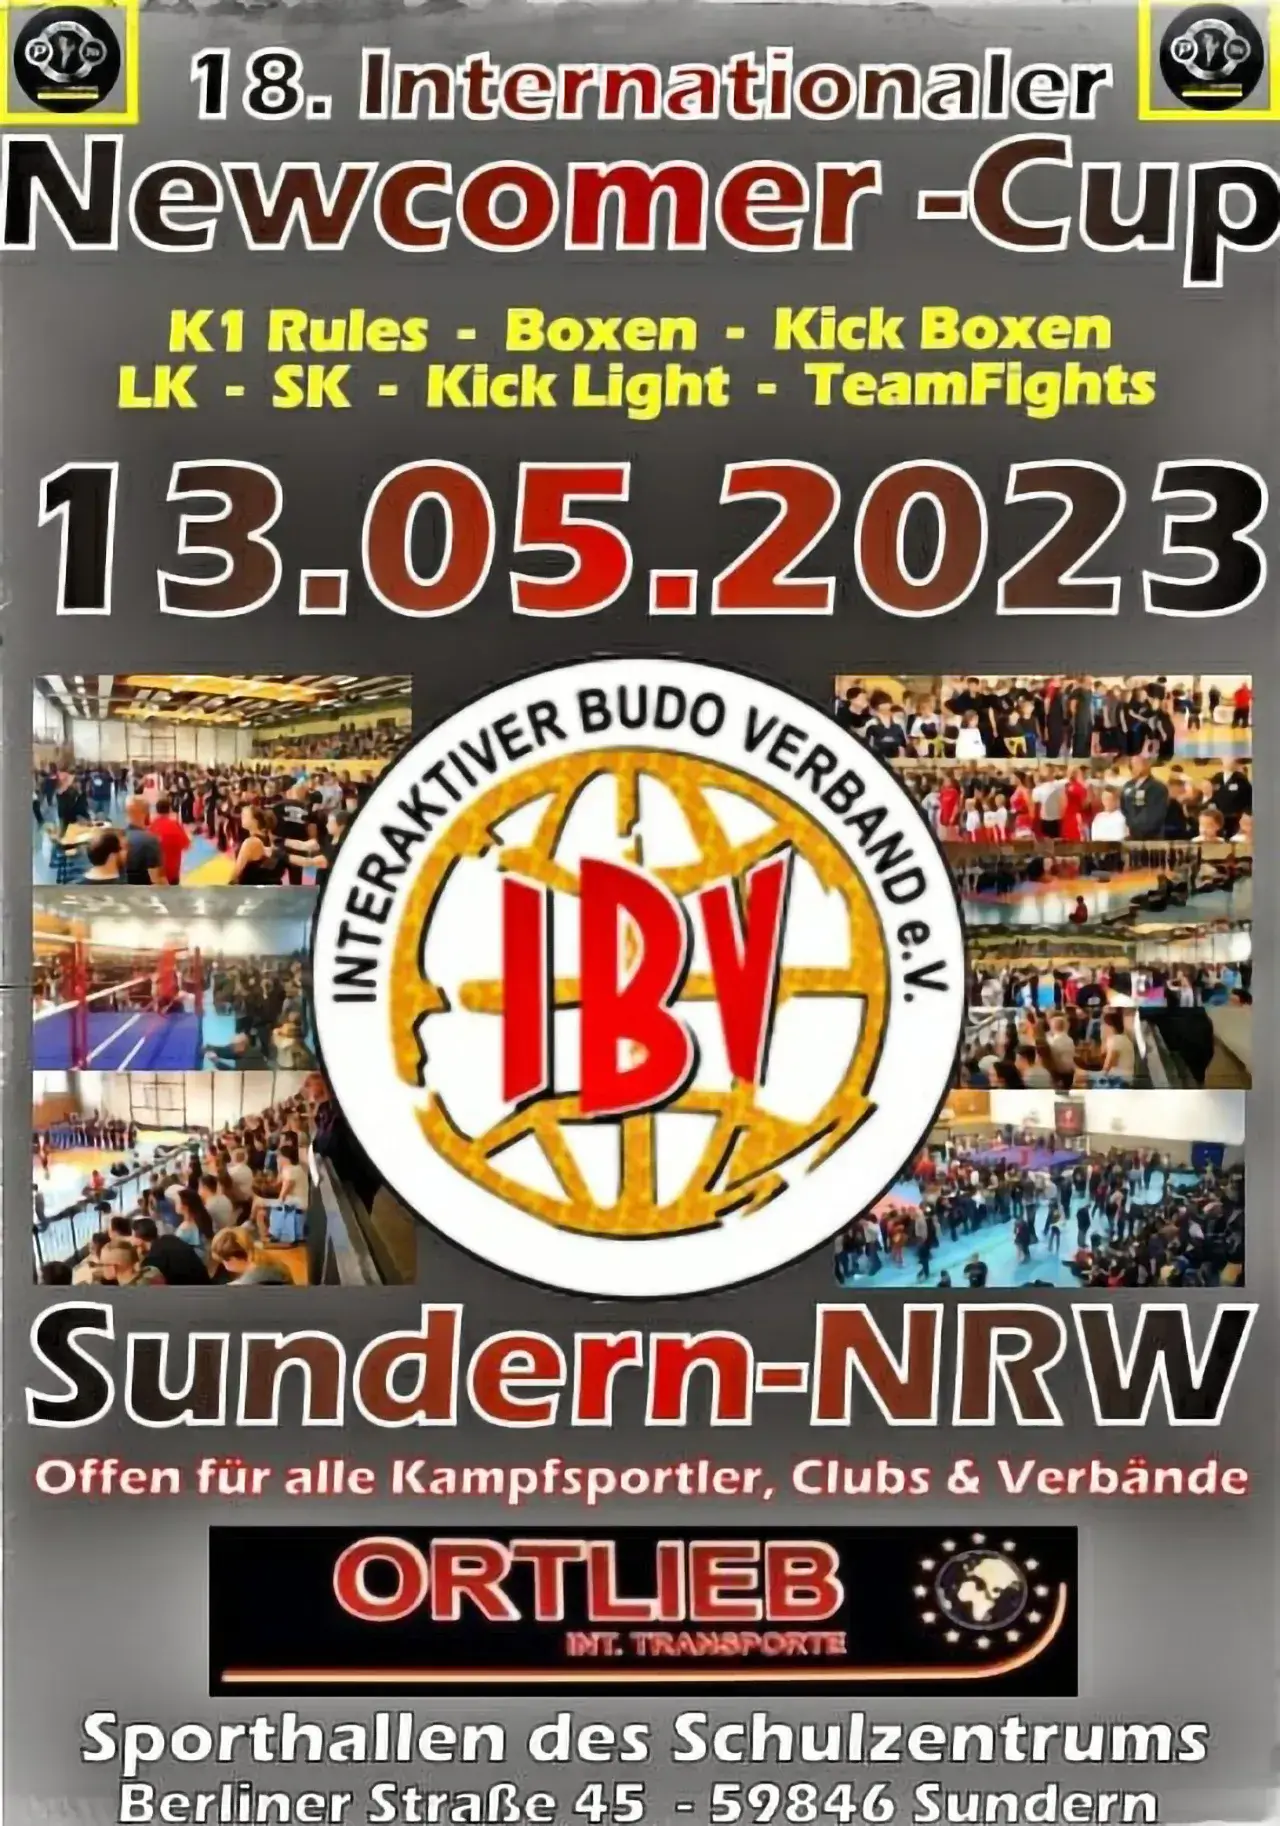 18 Newcomer Cup des IBV am 13 Mai 2023 in Sundern